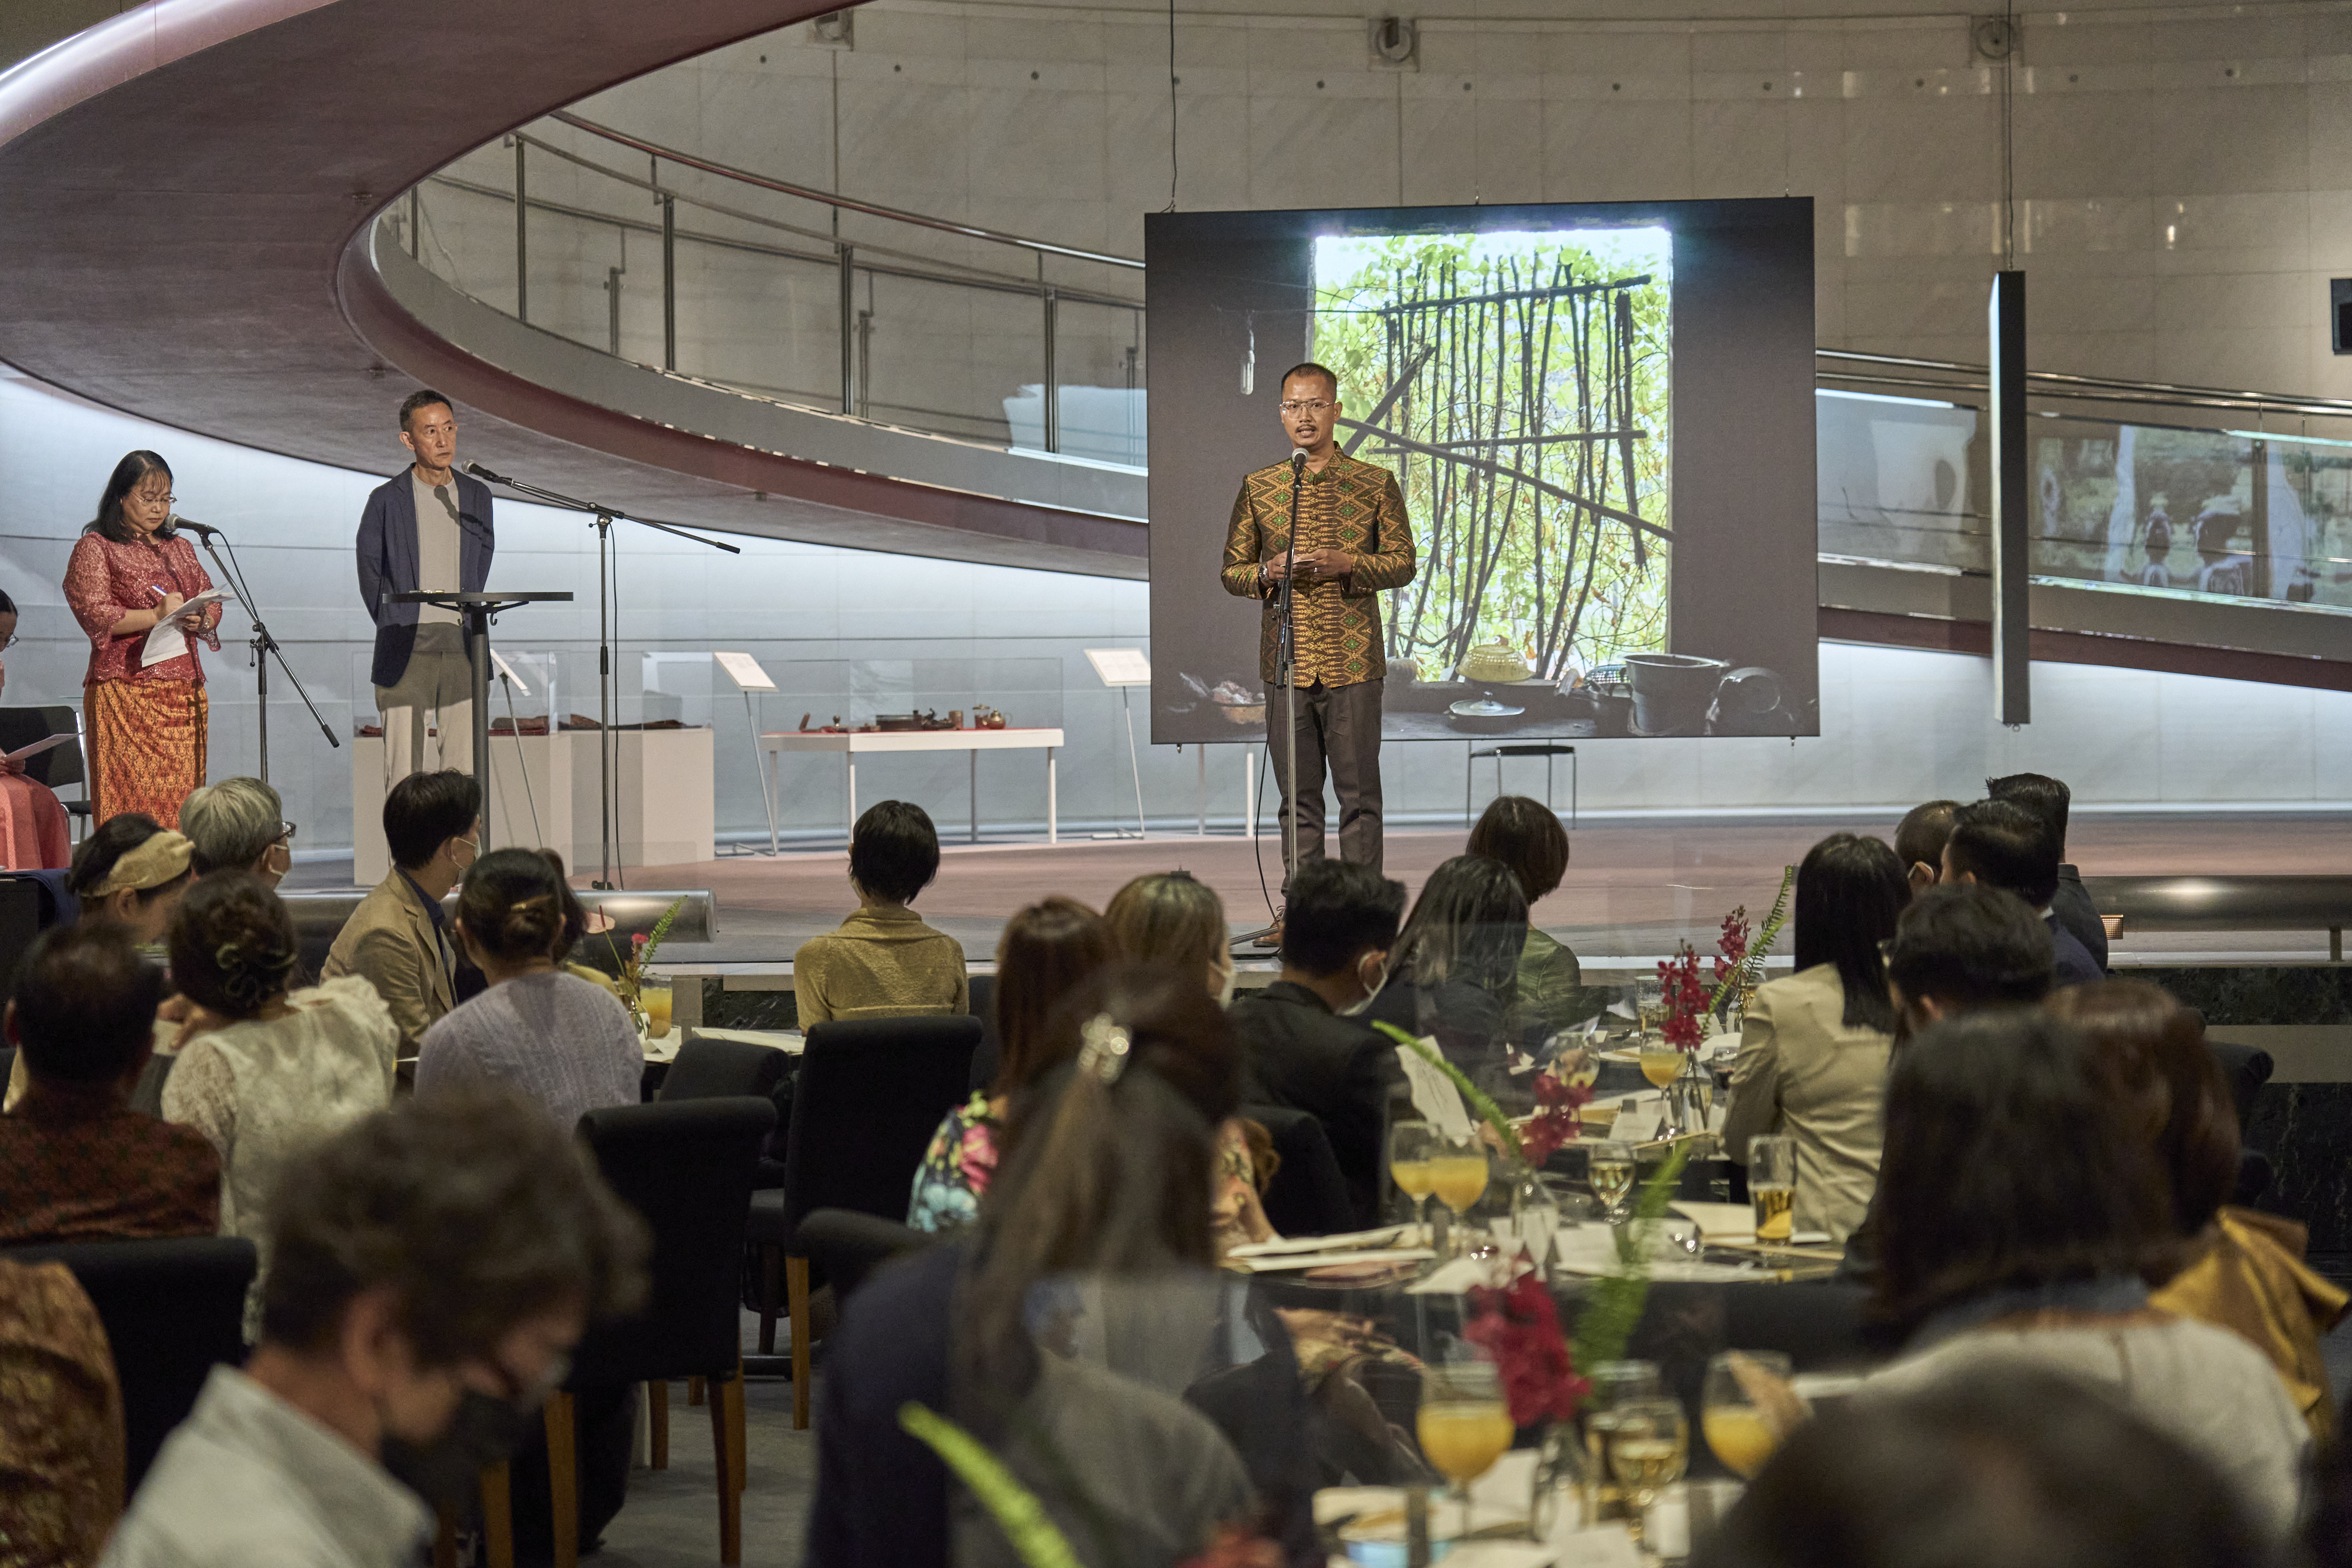 Slider Image Kim Hak speaks on a stage at his exhibition opening, in front of a crowd of attendees seated at tables